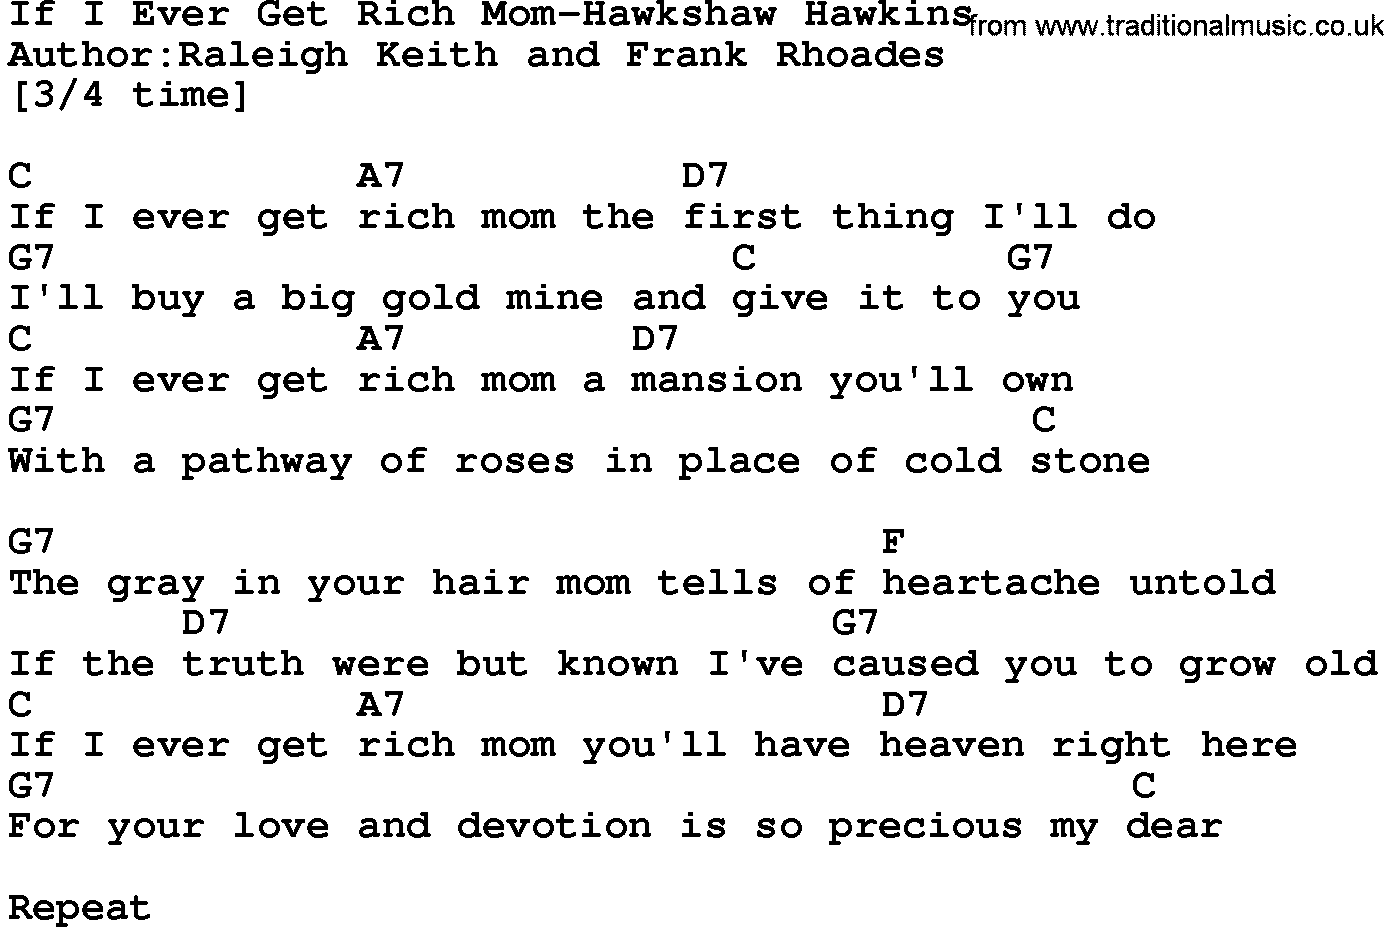 Country music song: If I Ever Get Rich Mom-Hawkshaw Hawkins lyrics and chords